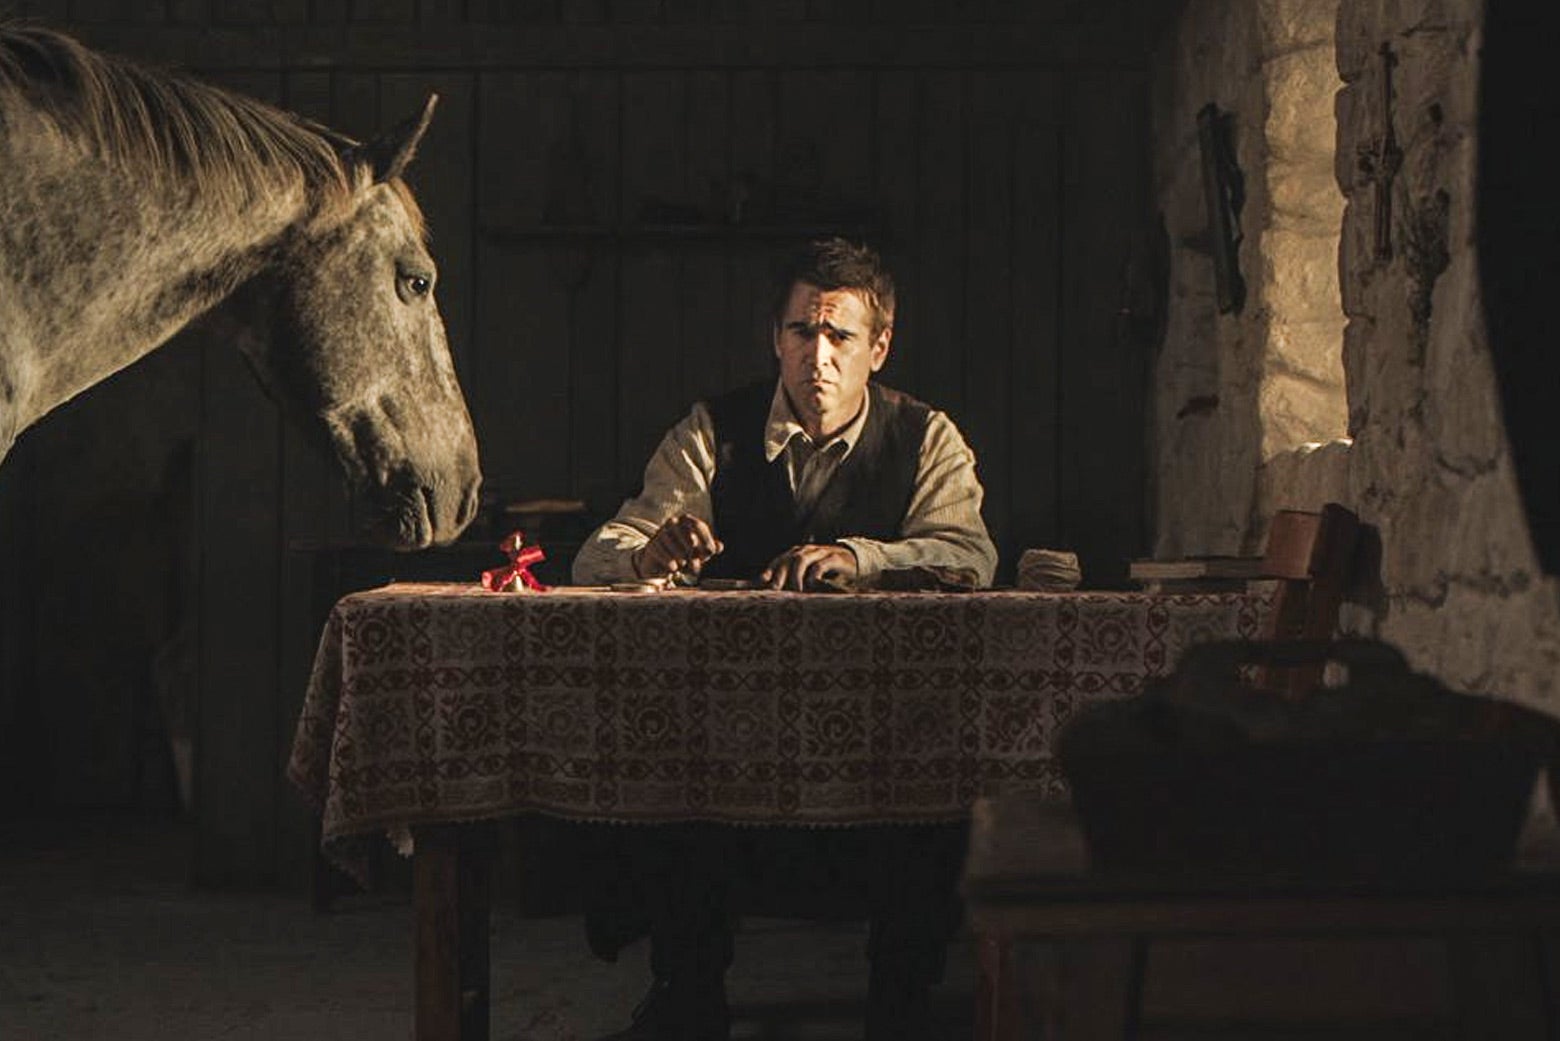 In a still from The Banshees of Inisherin, Colin Farrell sits in a rural home next to a donkey.